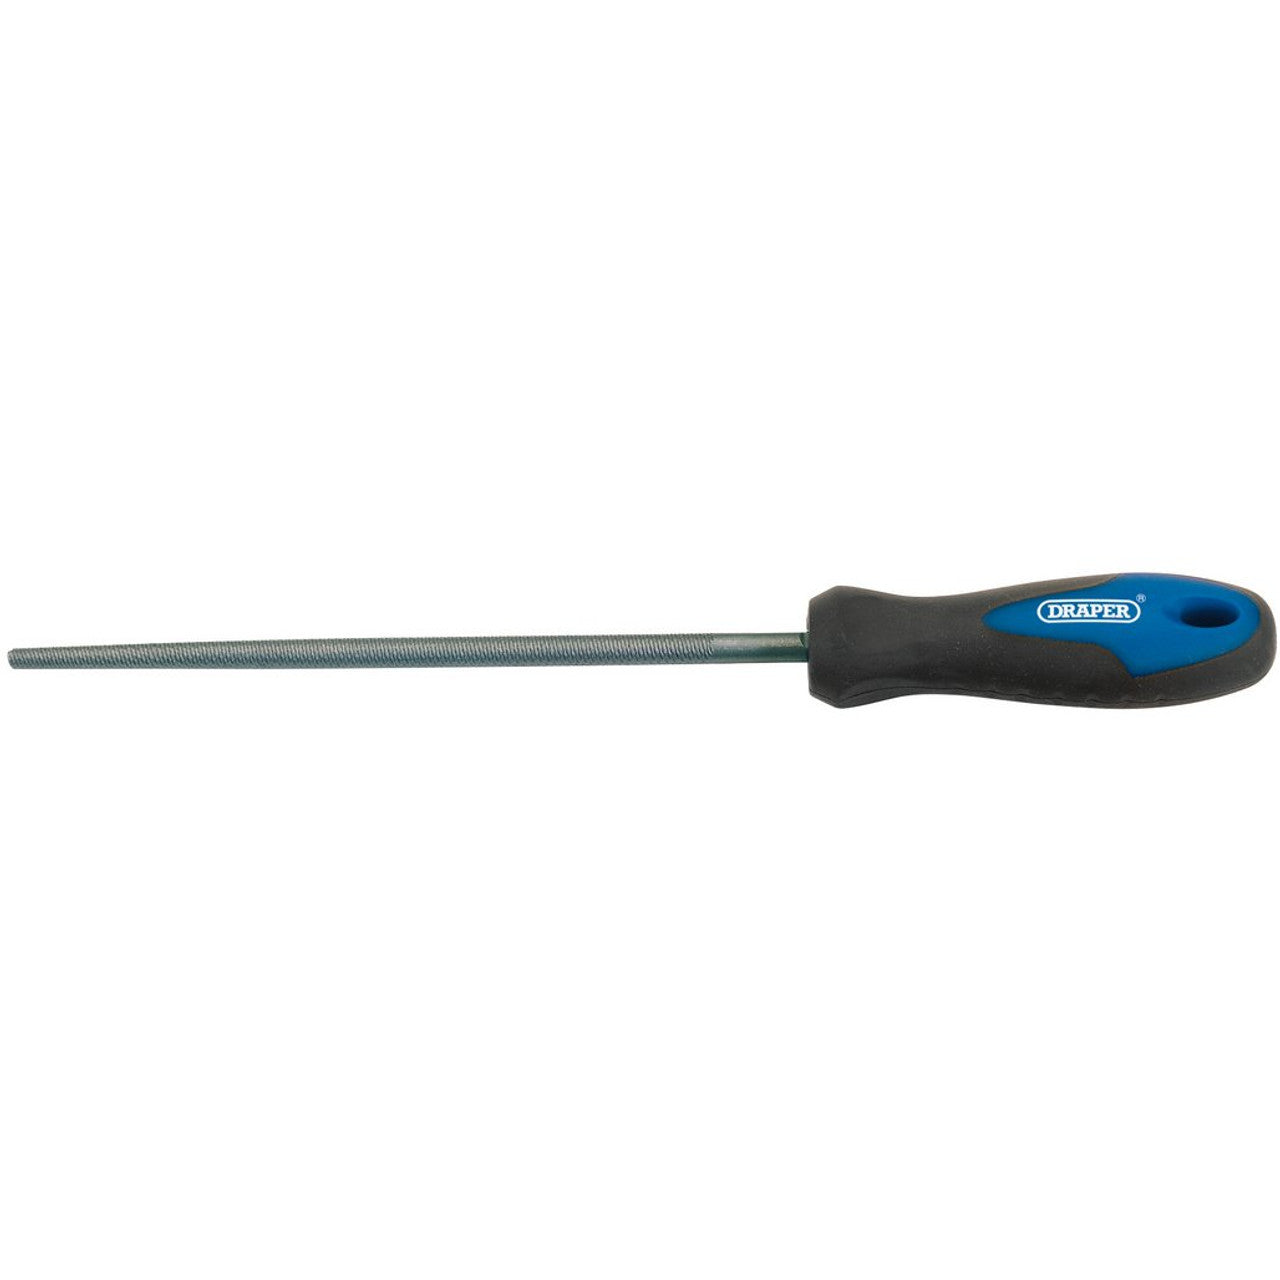 Draper 44955 Soft Grip Engineer's Round File and Handle, 200mm